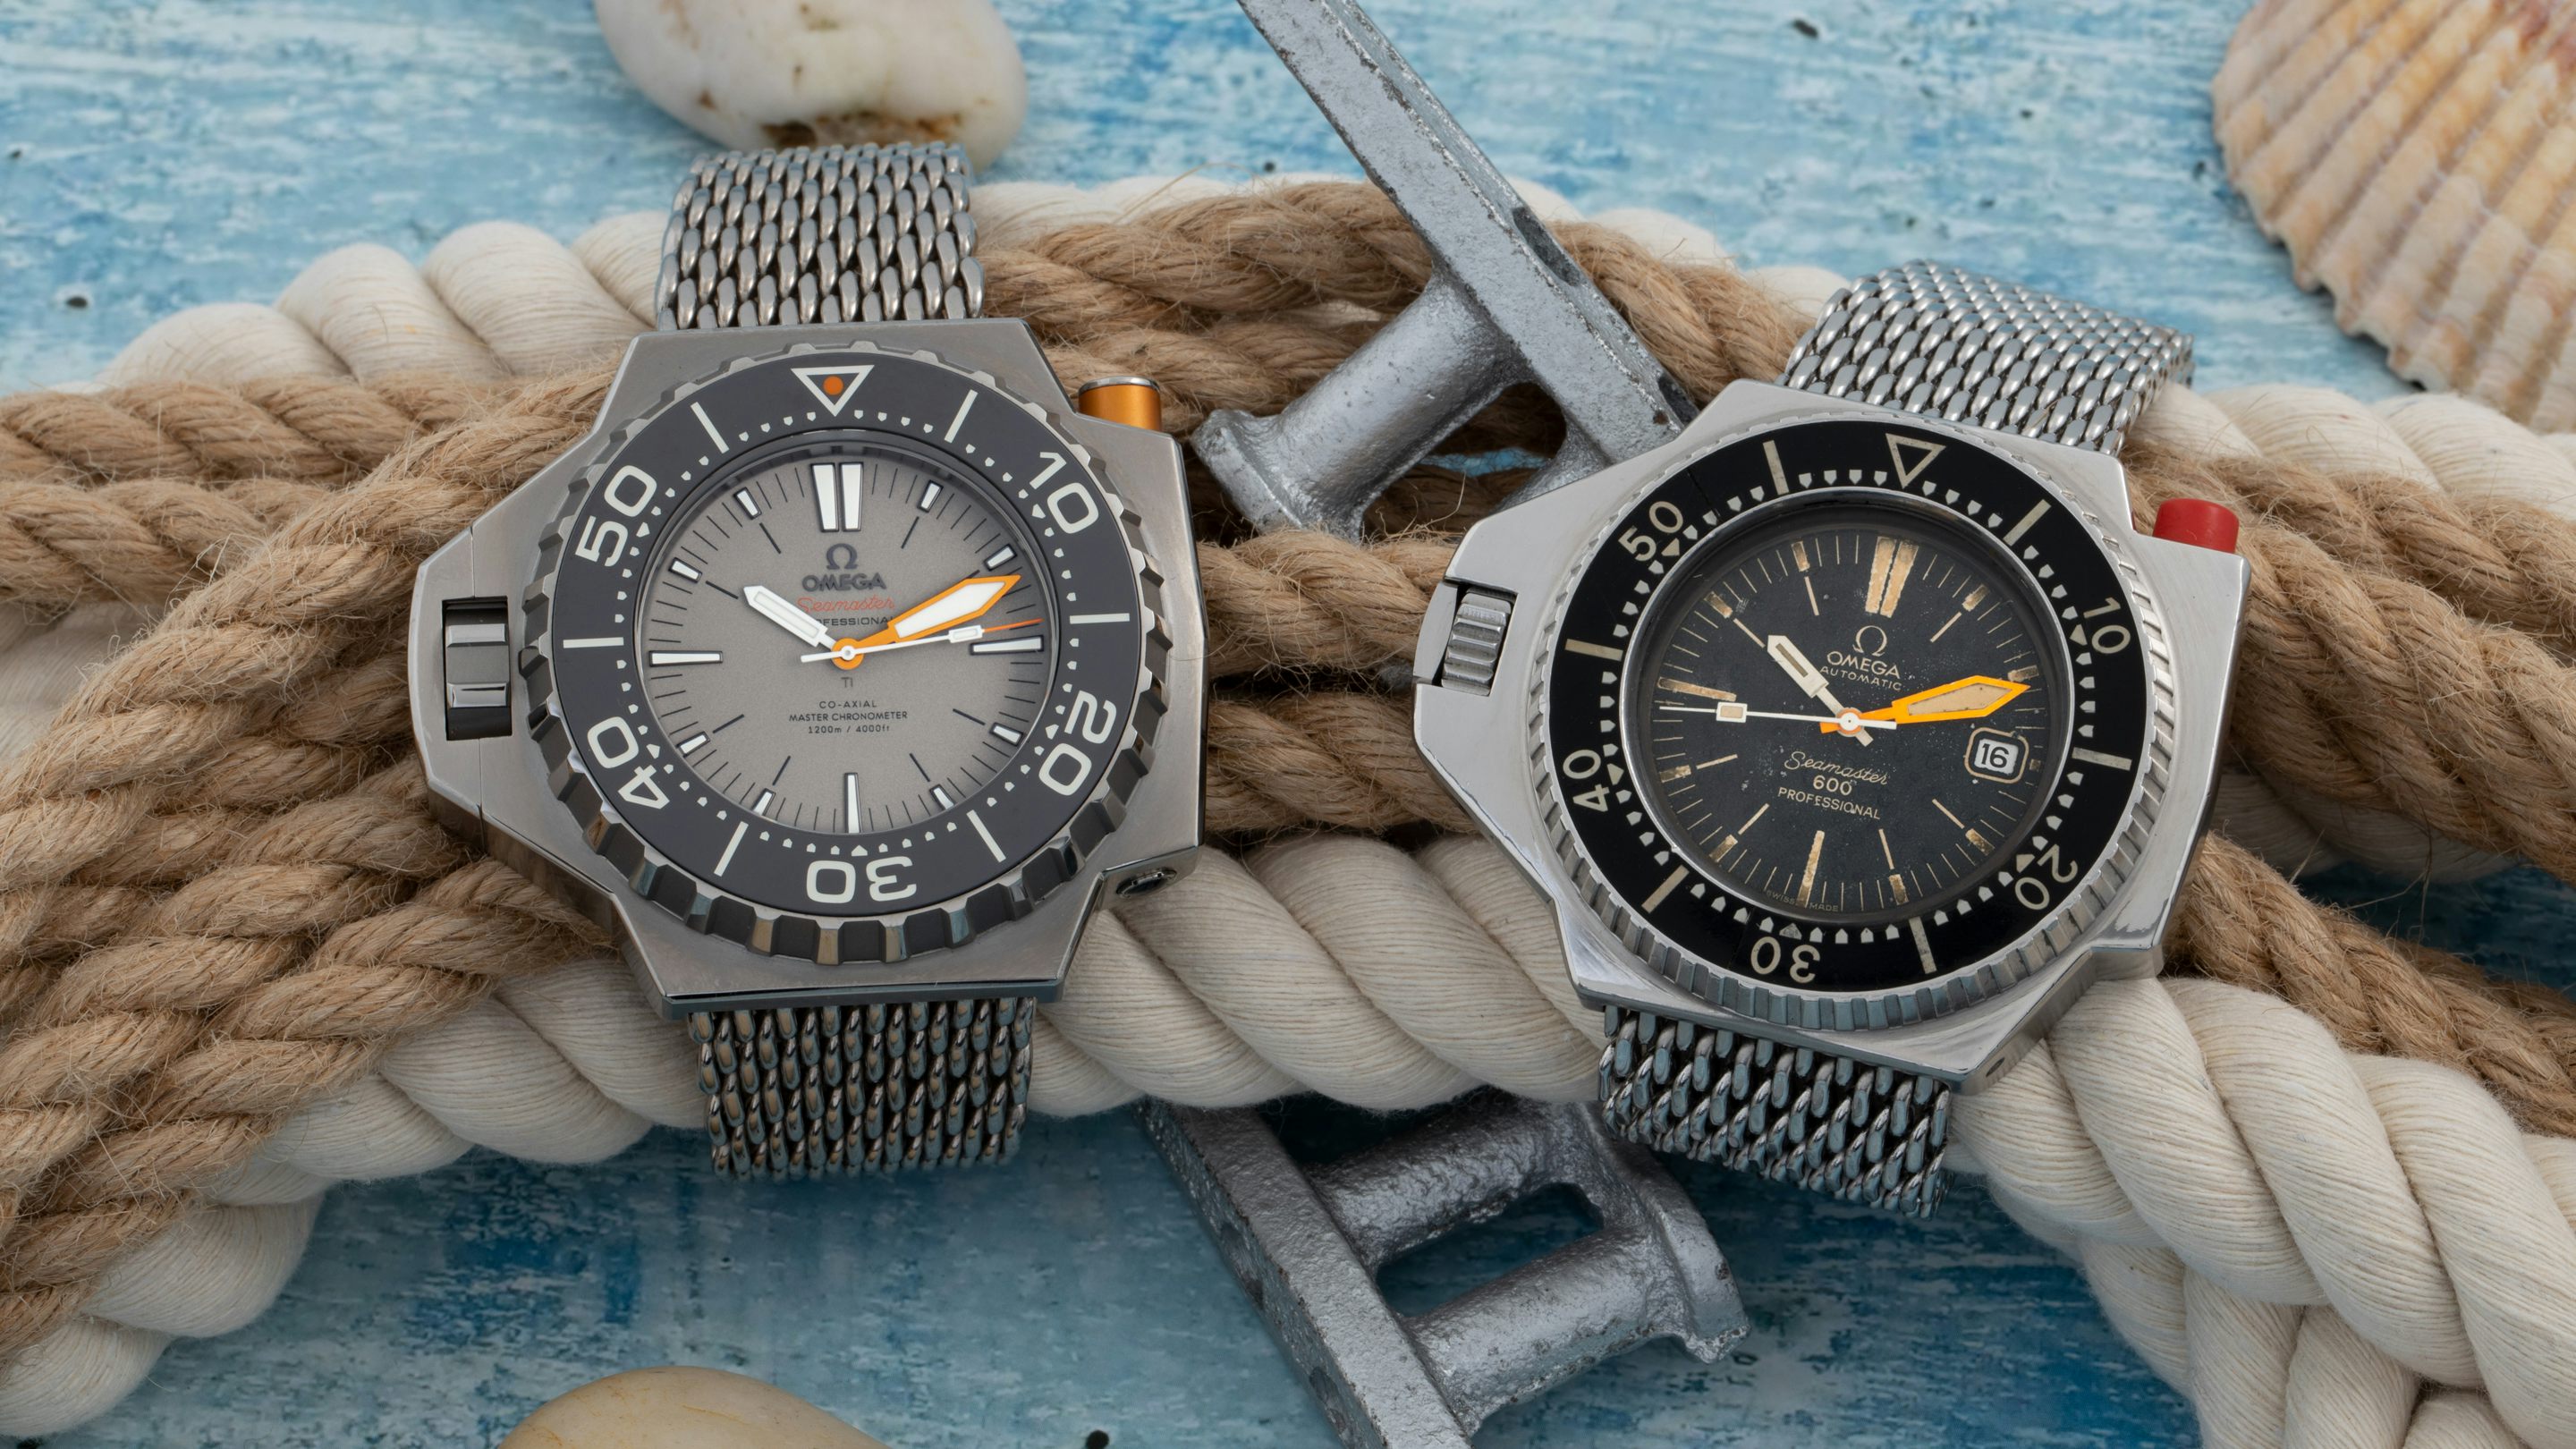 OMEGA Watches - Every tiny component carefully considered